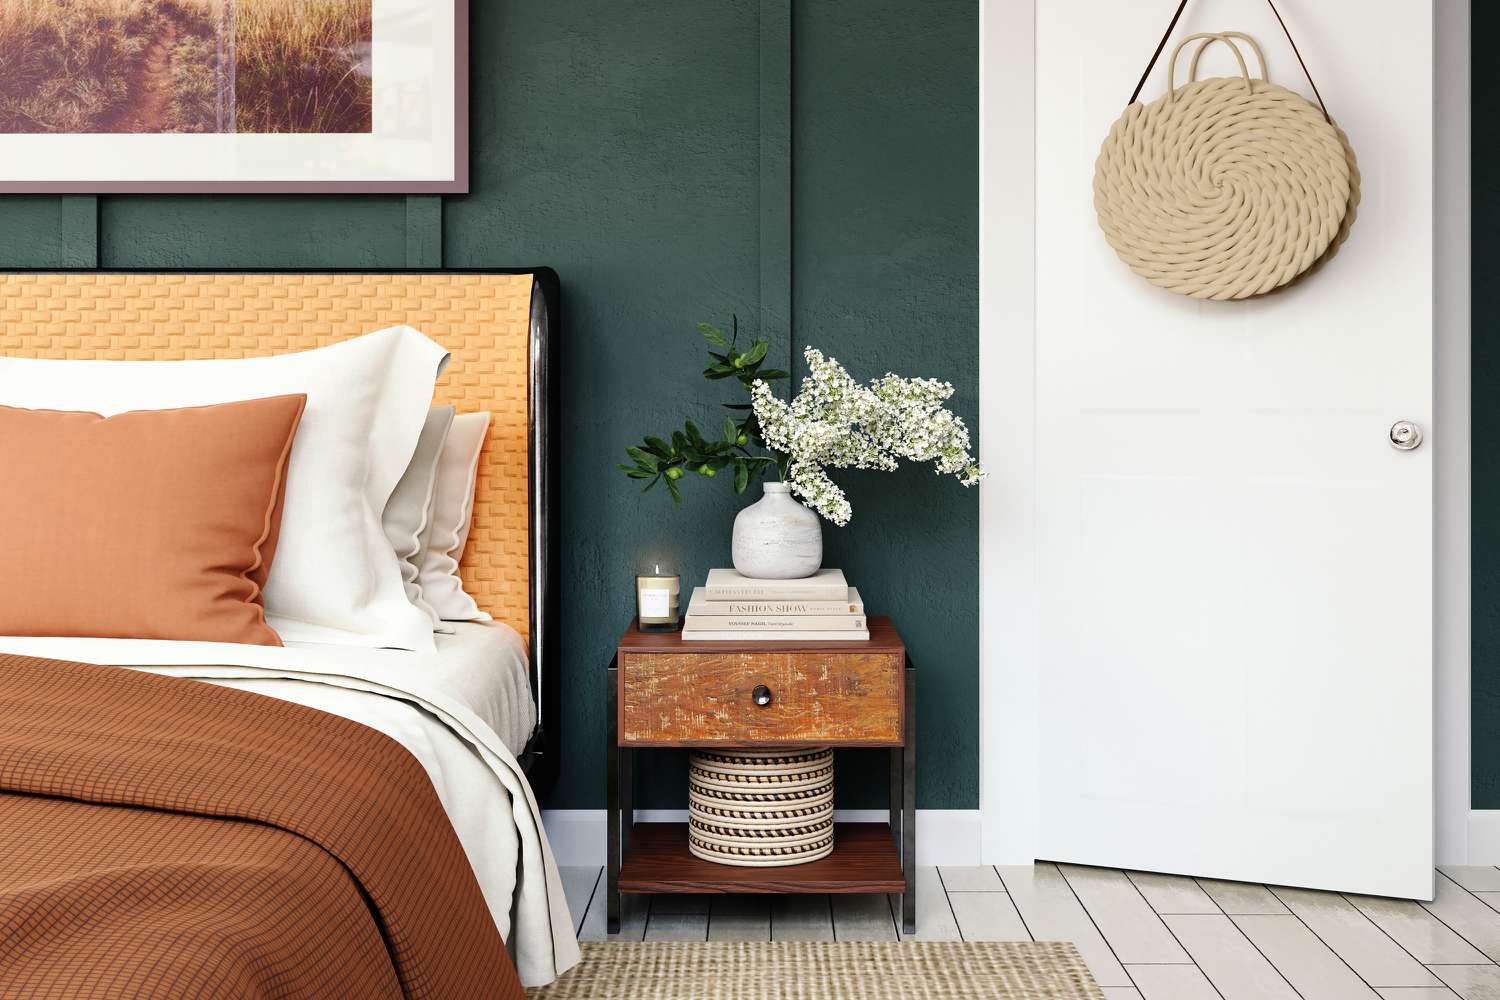 5 Colors You Should Never Paint A Small Room – Designers Warned